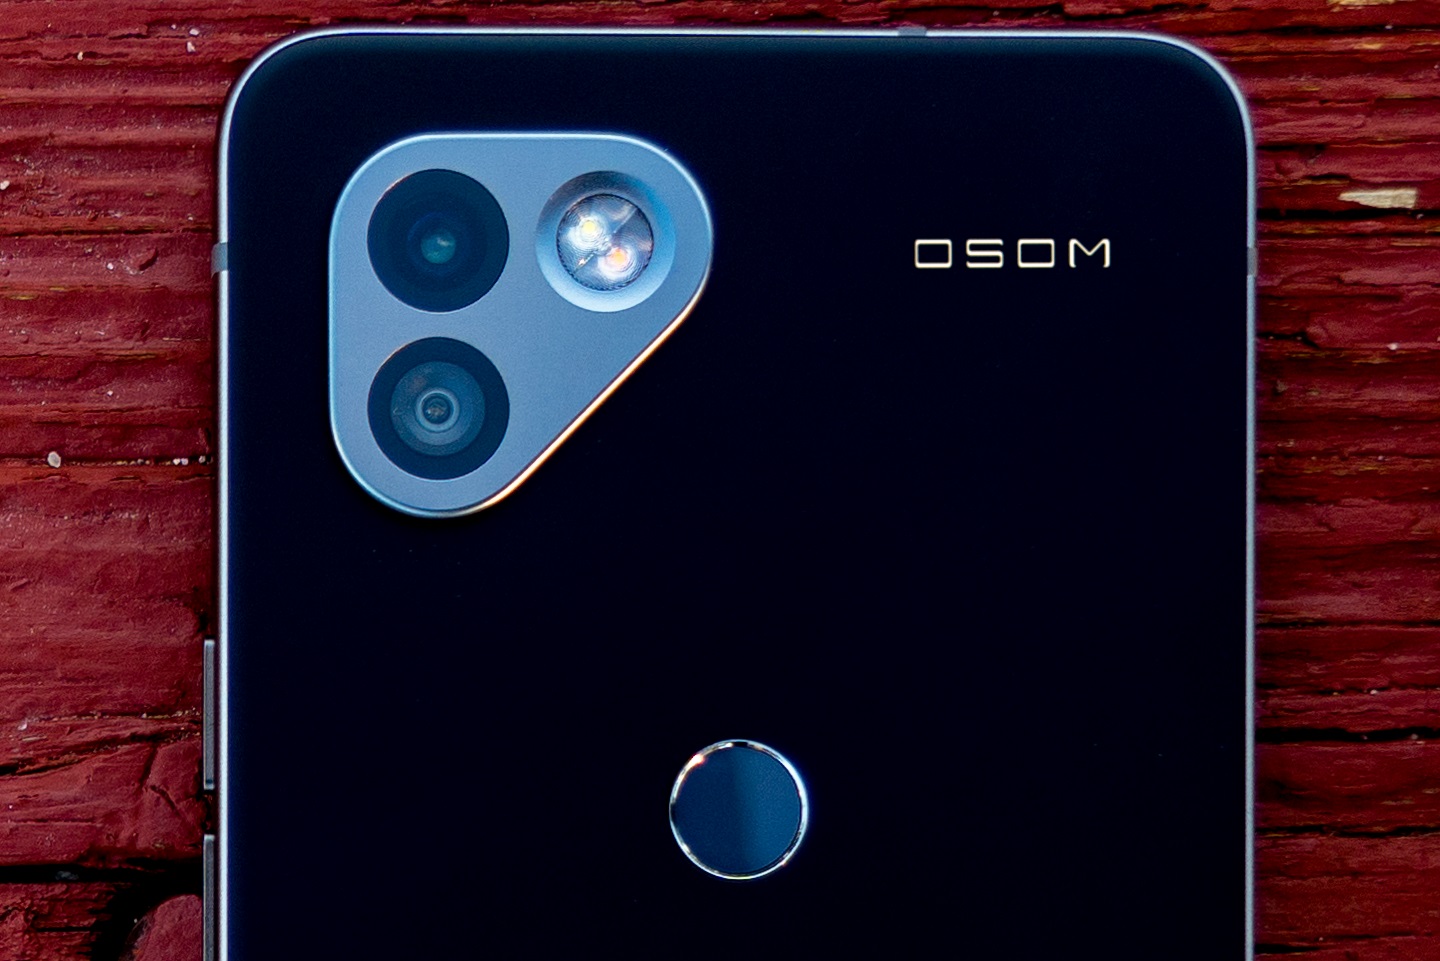 OSOM OV1 is the new smartphone of the former Essential Phone developers with a focus on privacy